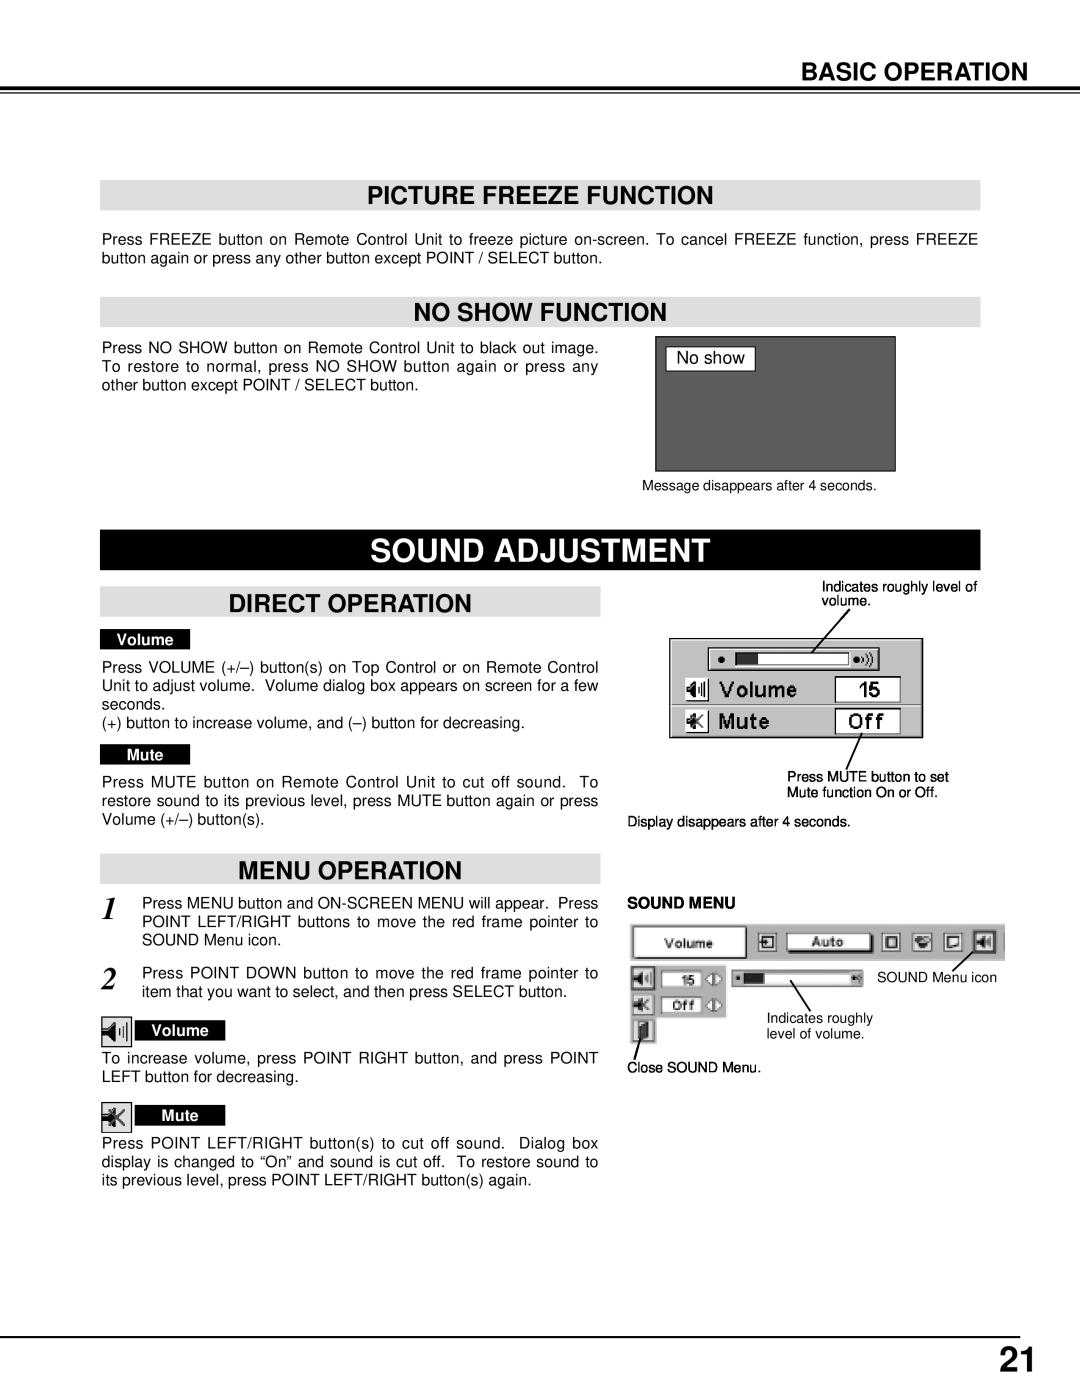 BOXLIGHT CINEMA 20HD Sound Adjustment, Basic Operation Picture Freeze Function, No Show Function, Direct Operation, Volume 